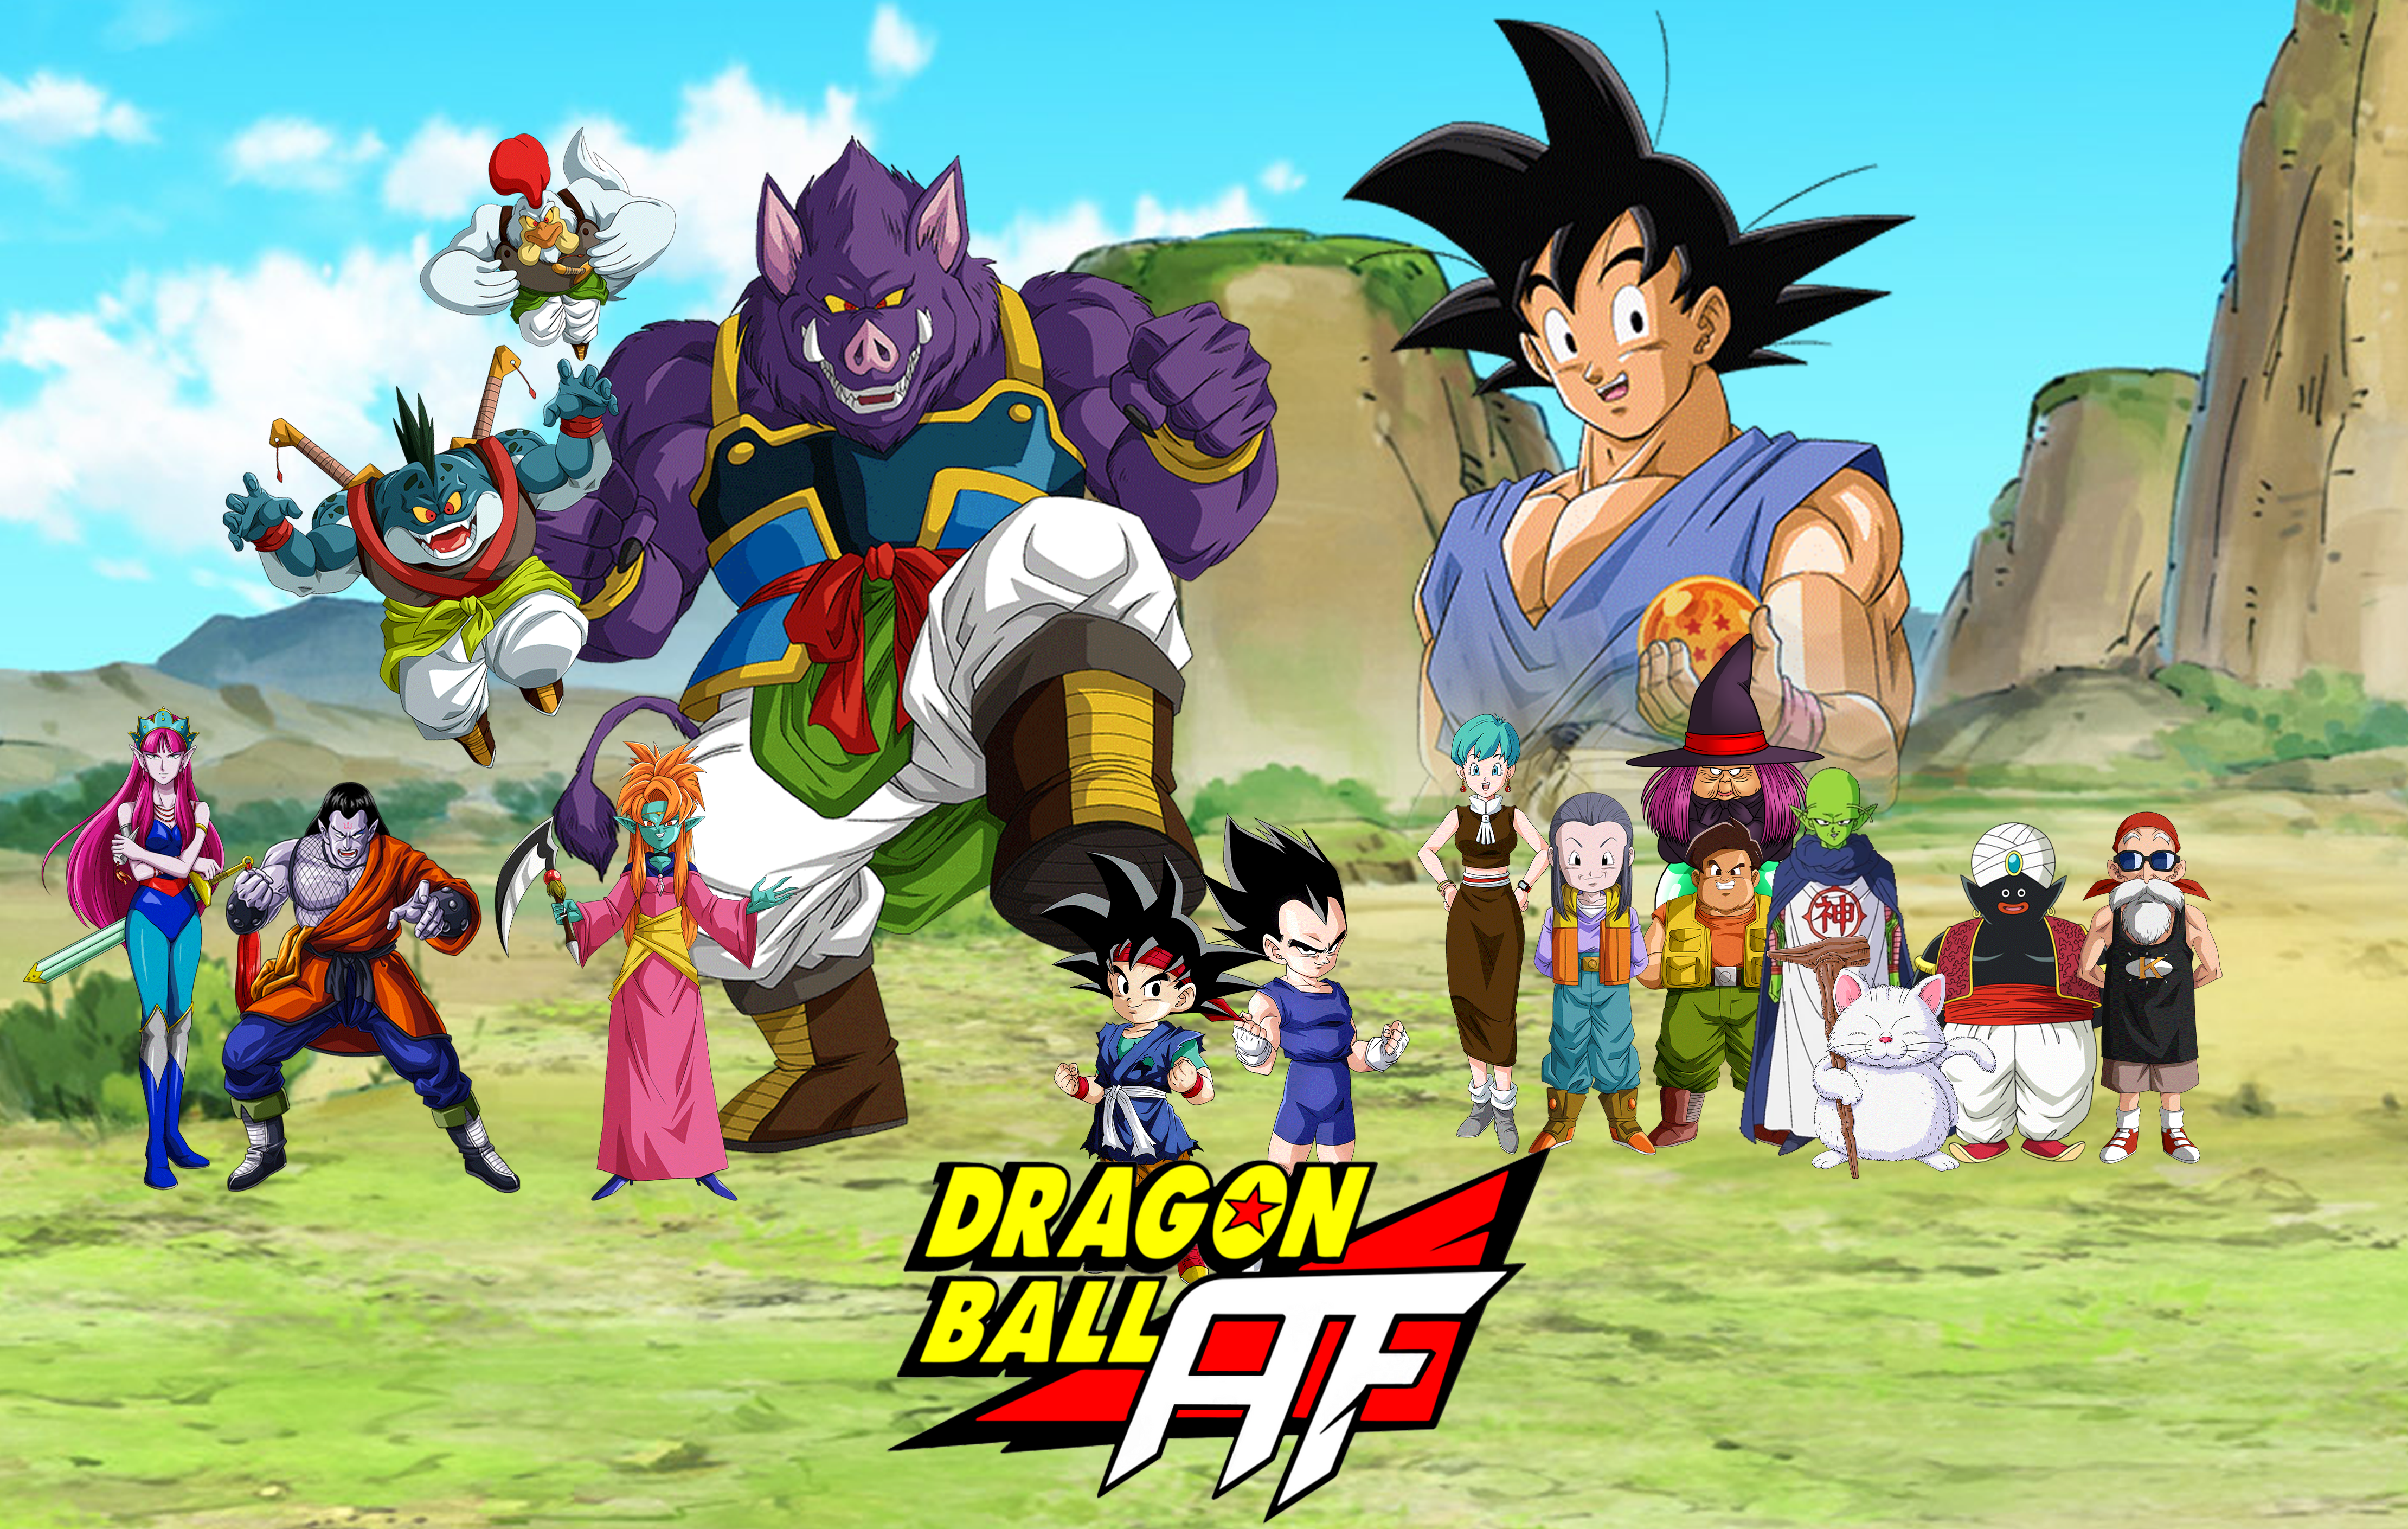 Dragon ball AF captulo 1 by PapeluchoAS on DeviantArt